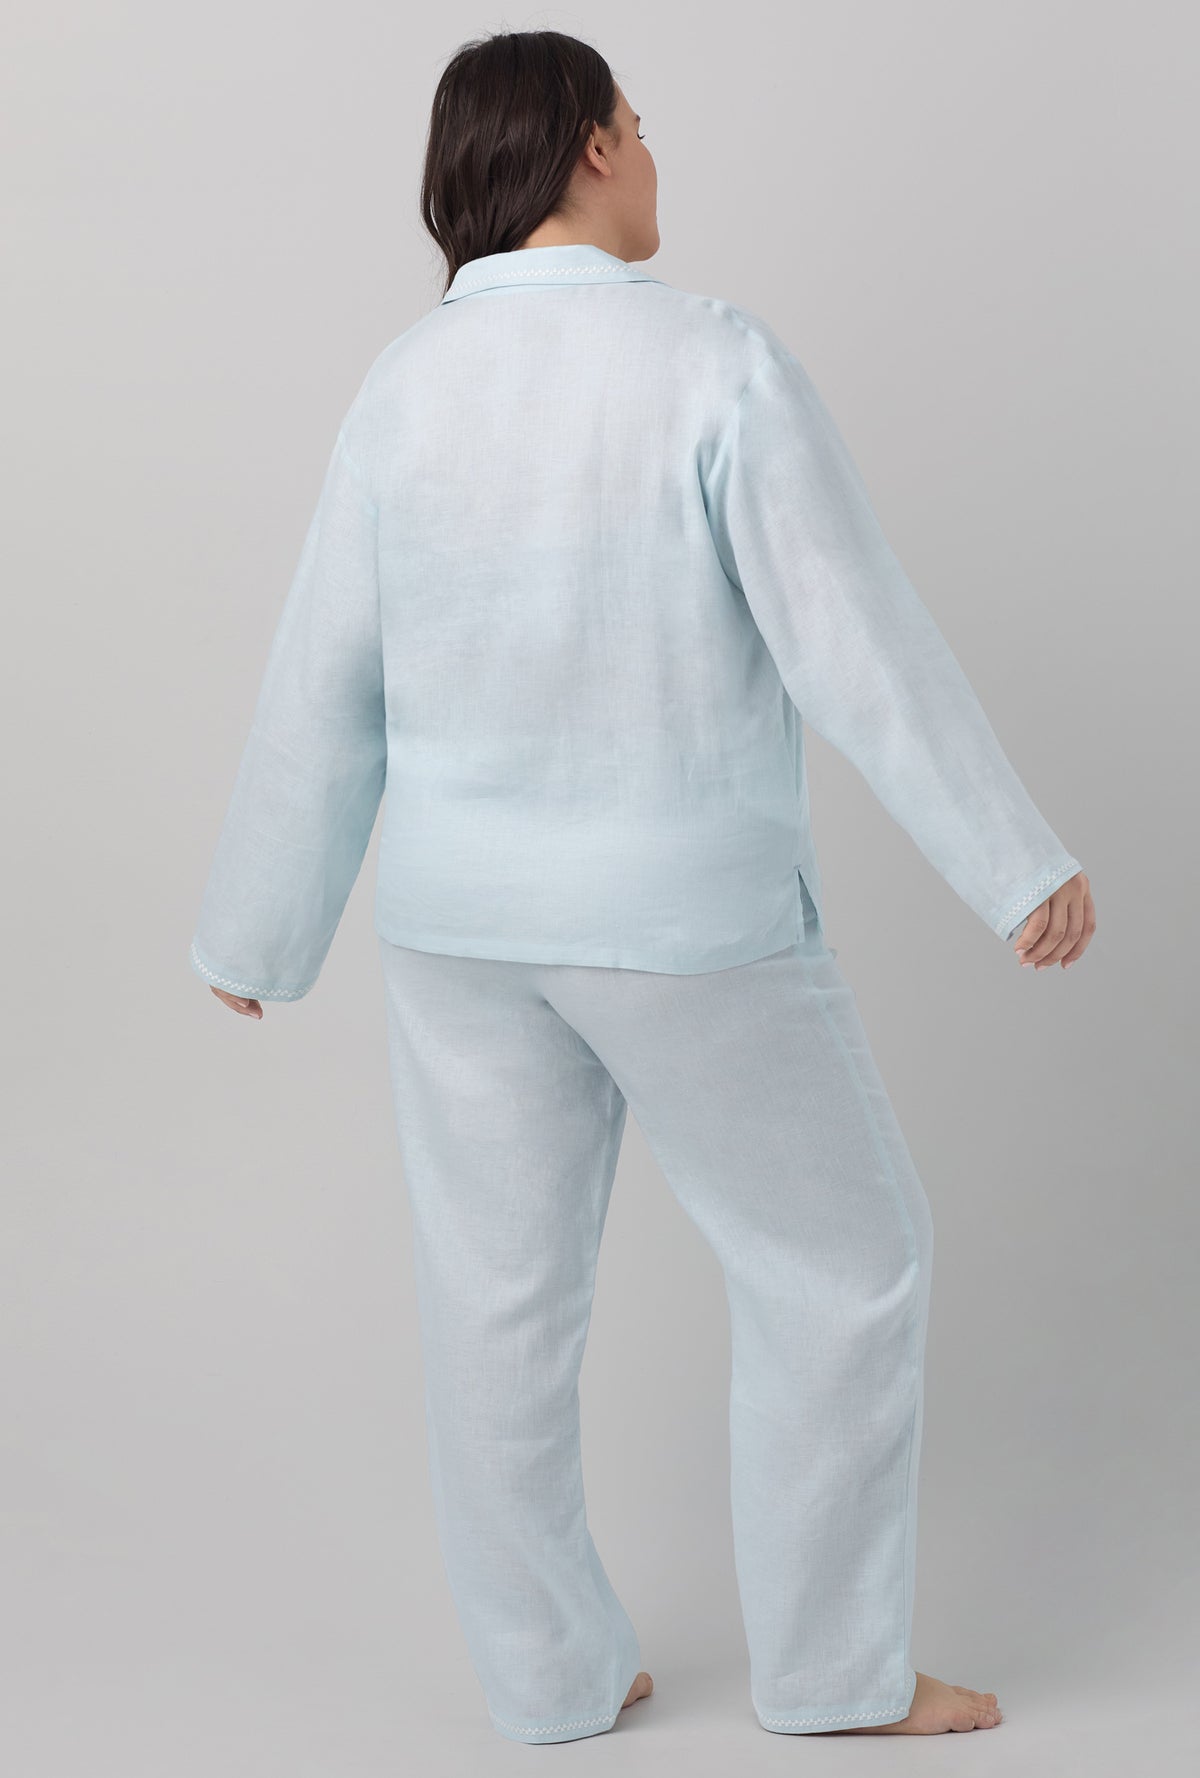 A lady wearing blue long sleeve classic linen plus size pj set with delicate blue print.